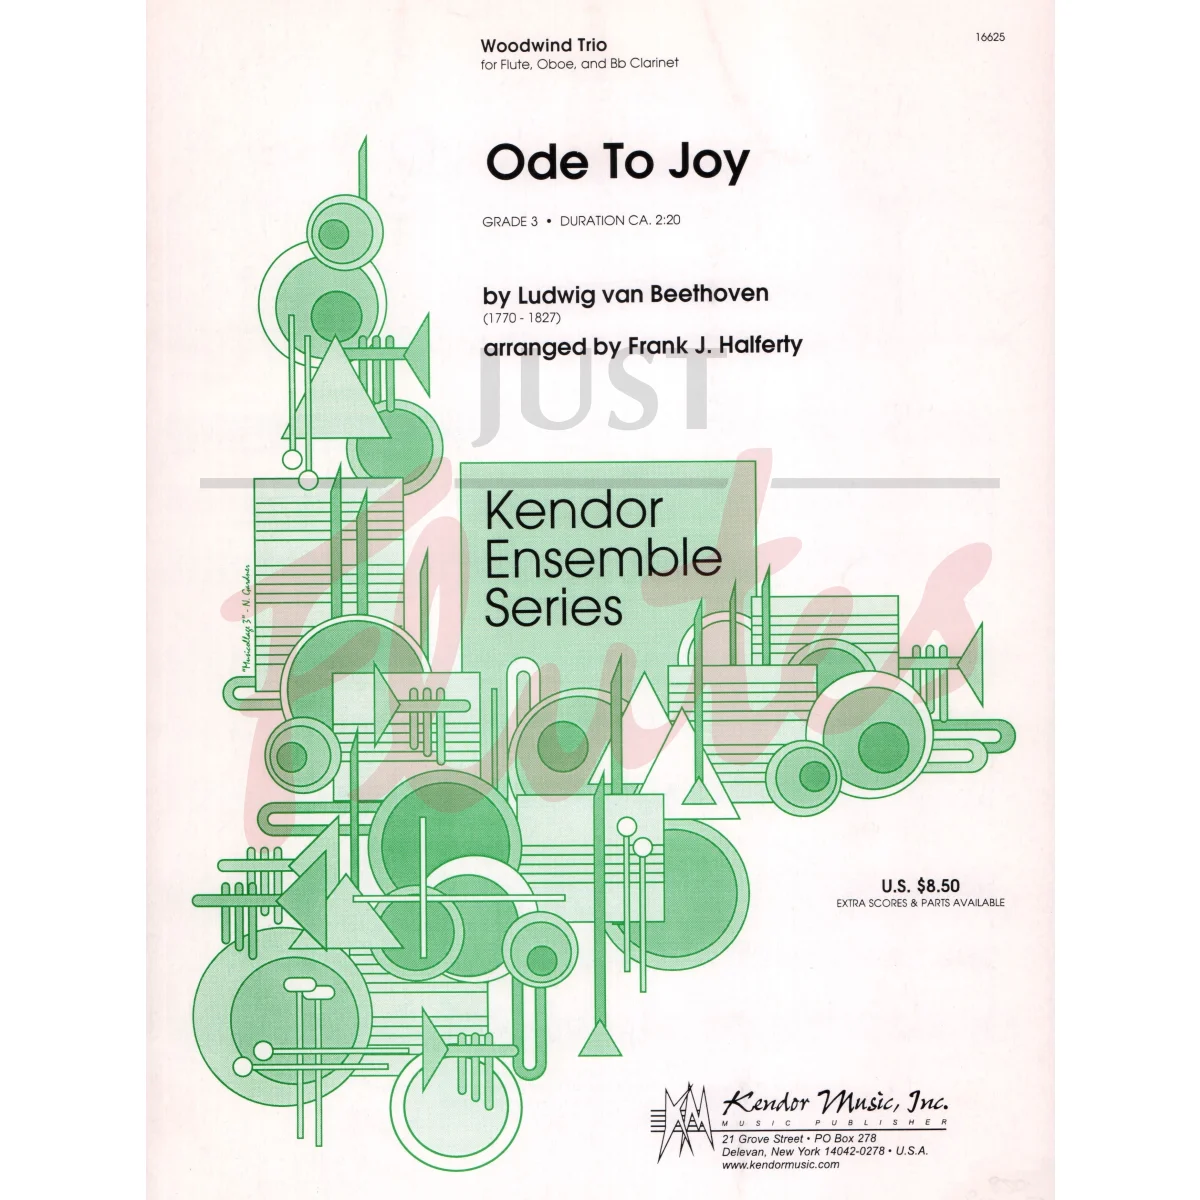 Ode to Joy for Wind Trio